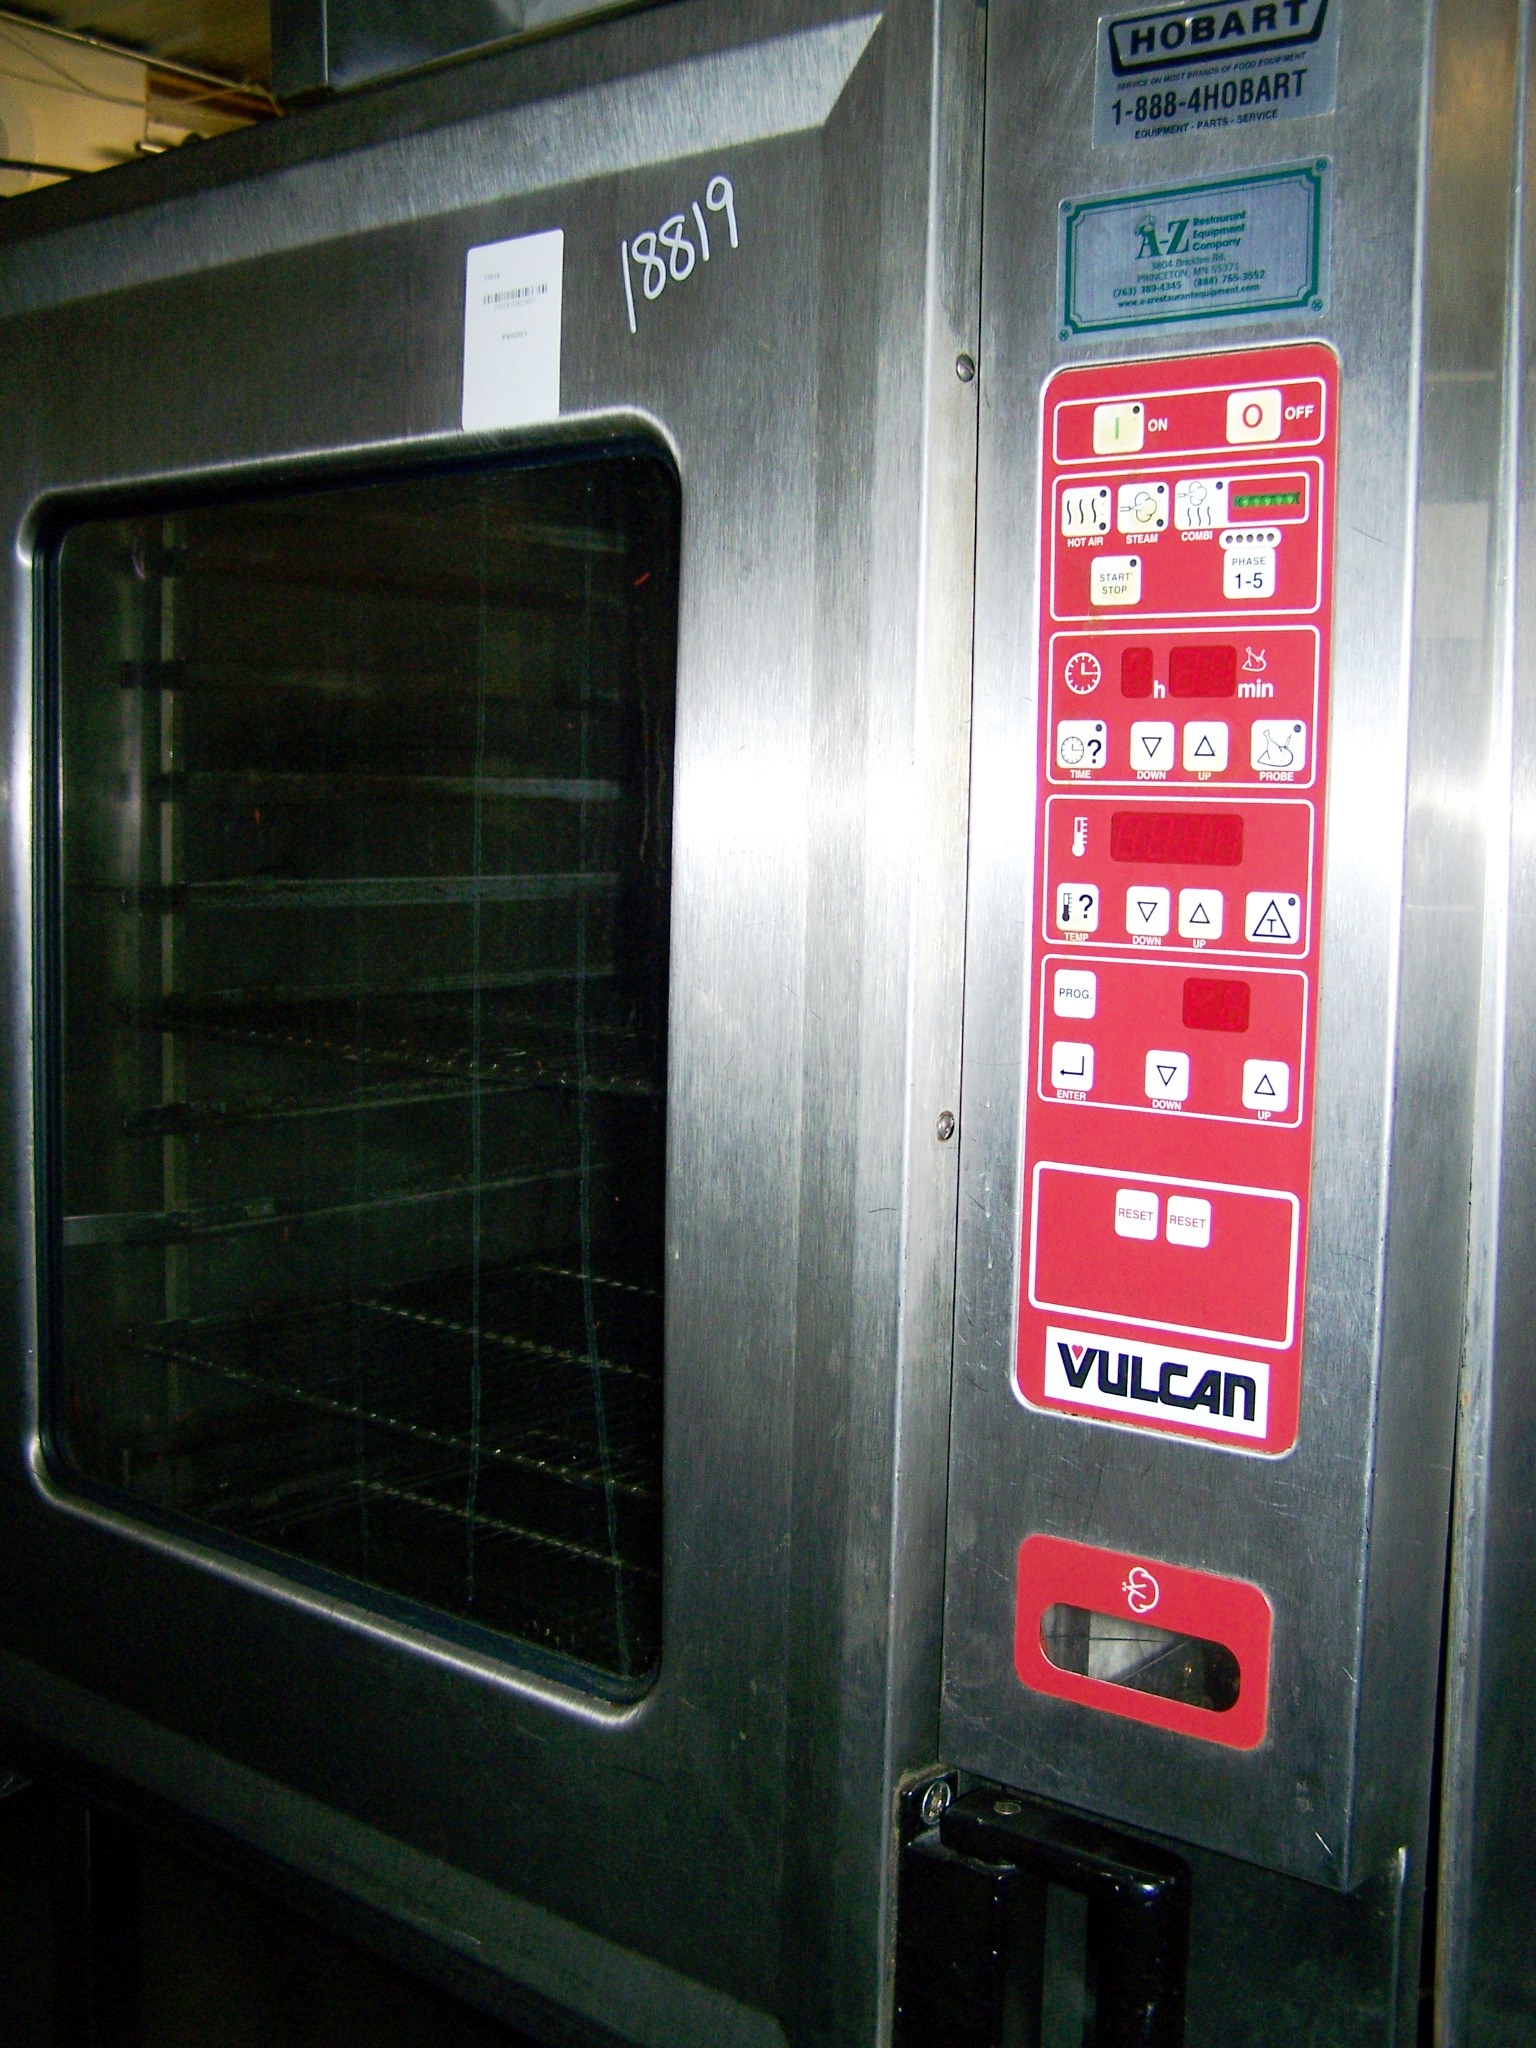 VULCAN 1-CMPT COMBI OVEN - CONVECTION AND OR STEAM